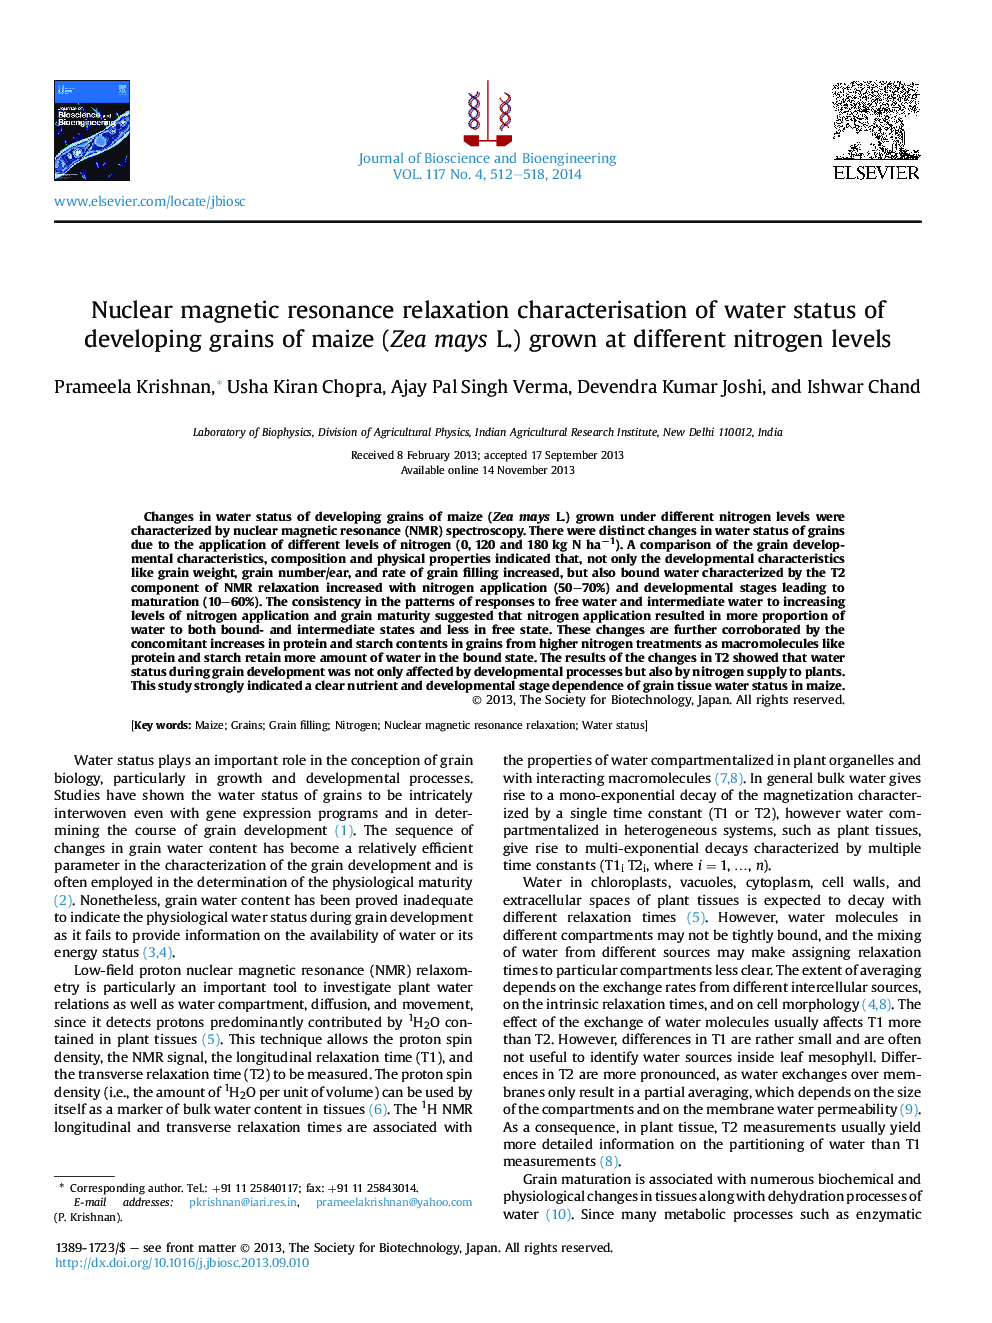 Nuclear magnetic resonance relaxation characterisation of water status of developing grains of maize (Zea mays L.) grown at different nitrogen levels